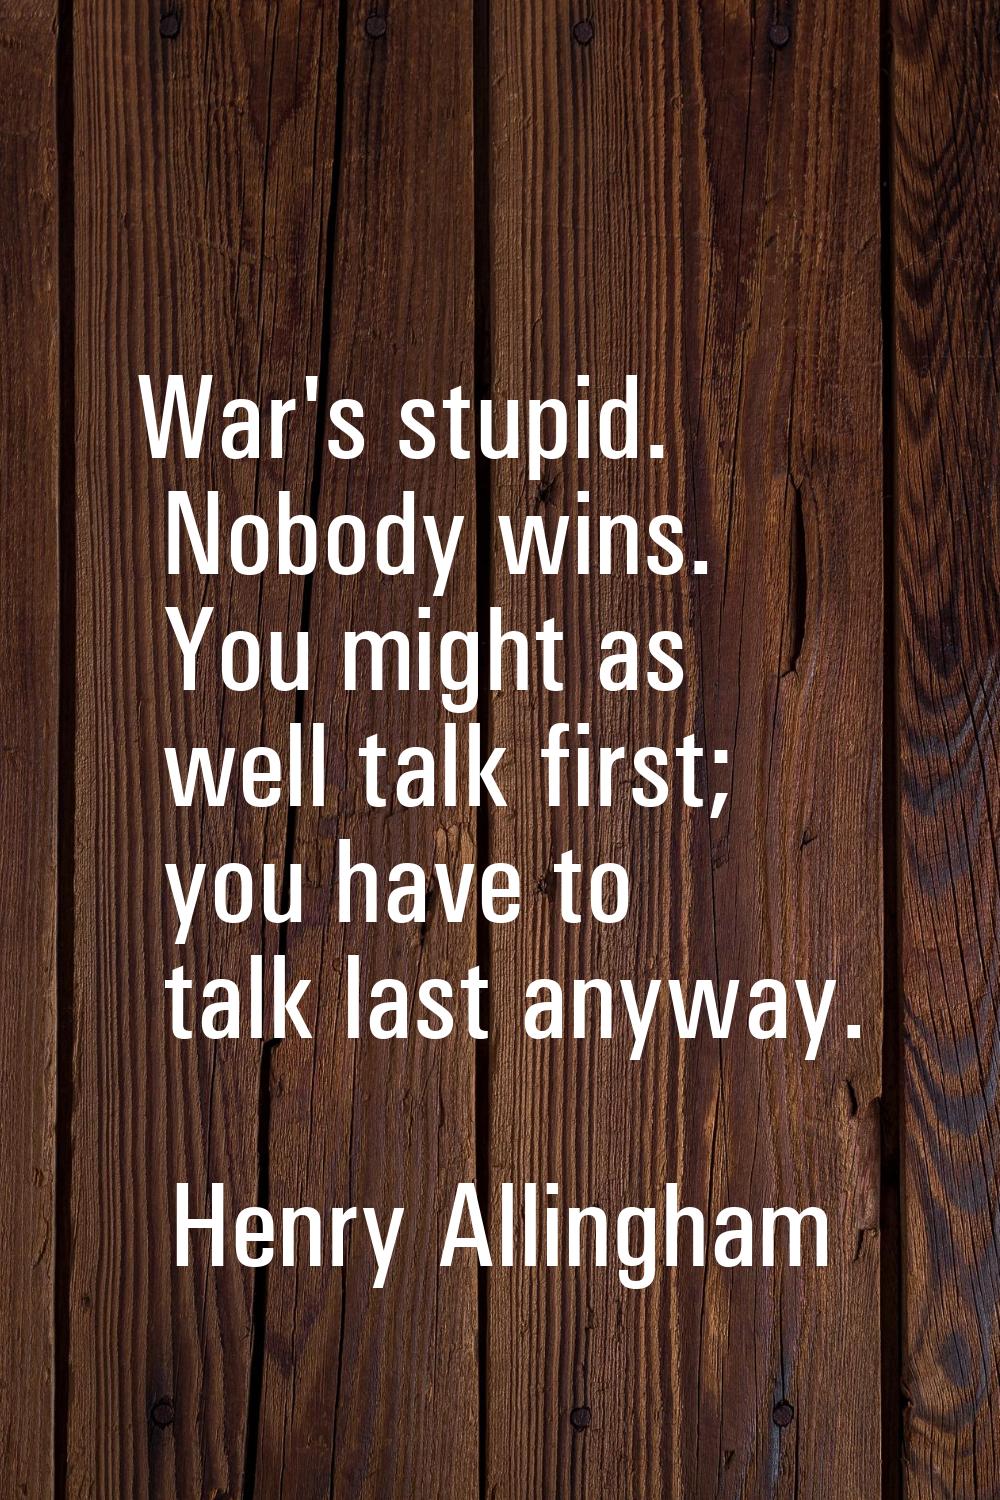 War's stupid. Nobody wins. You might as well talk first; you have to talk last anyway.